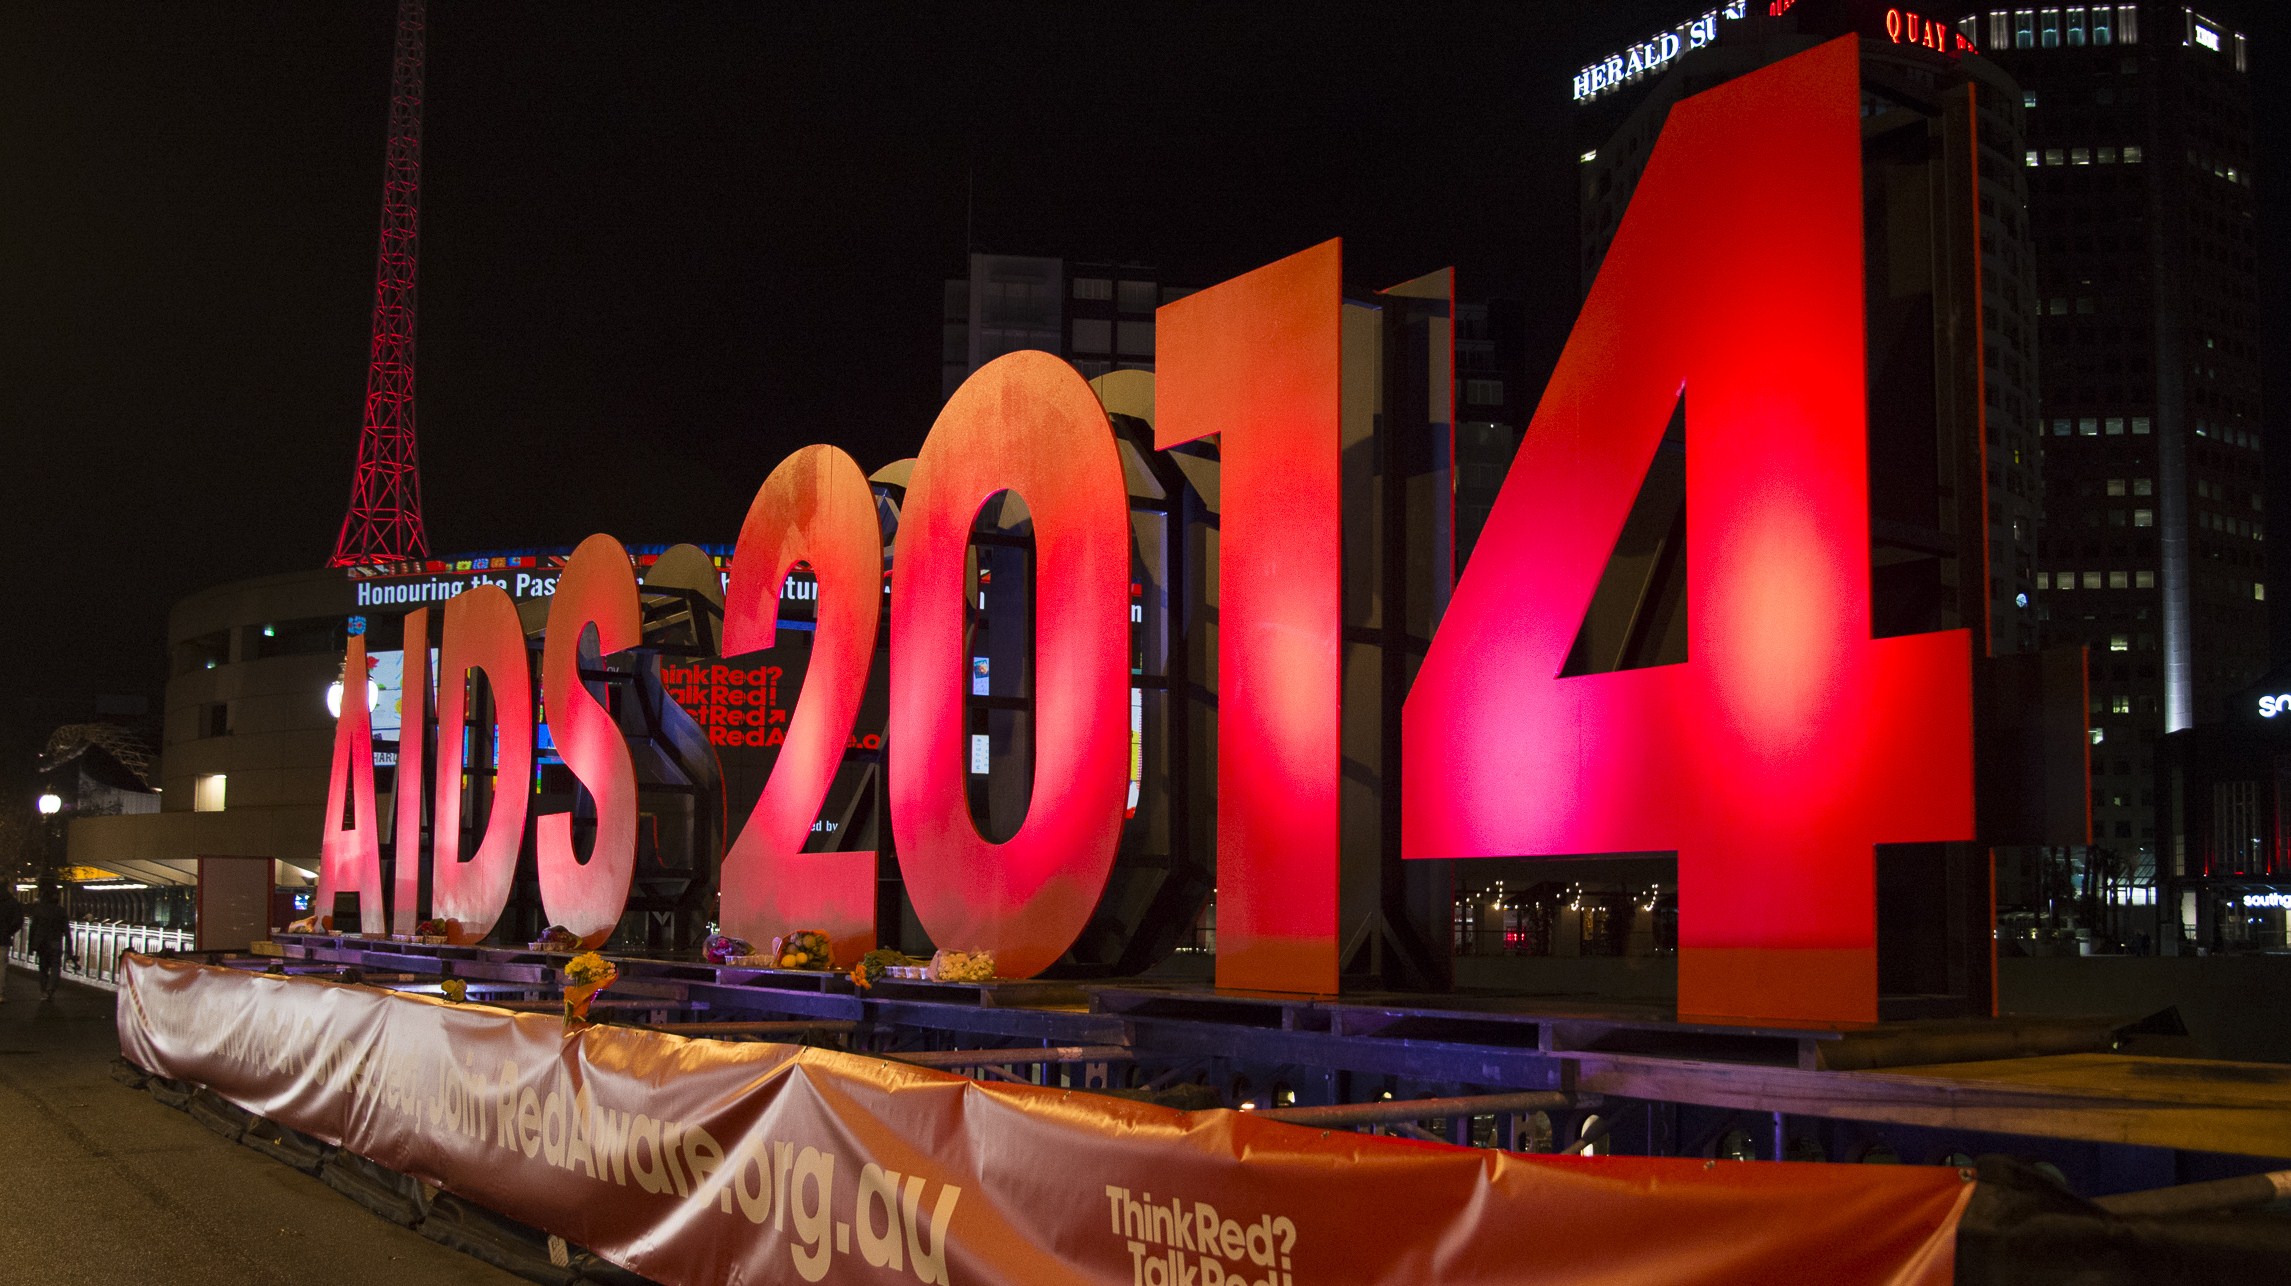 Tributes flow in for AIDS 2014 delegates perished in MH17 flight